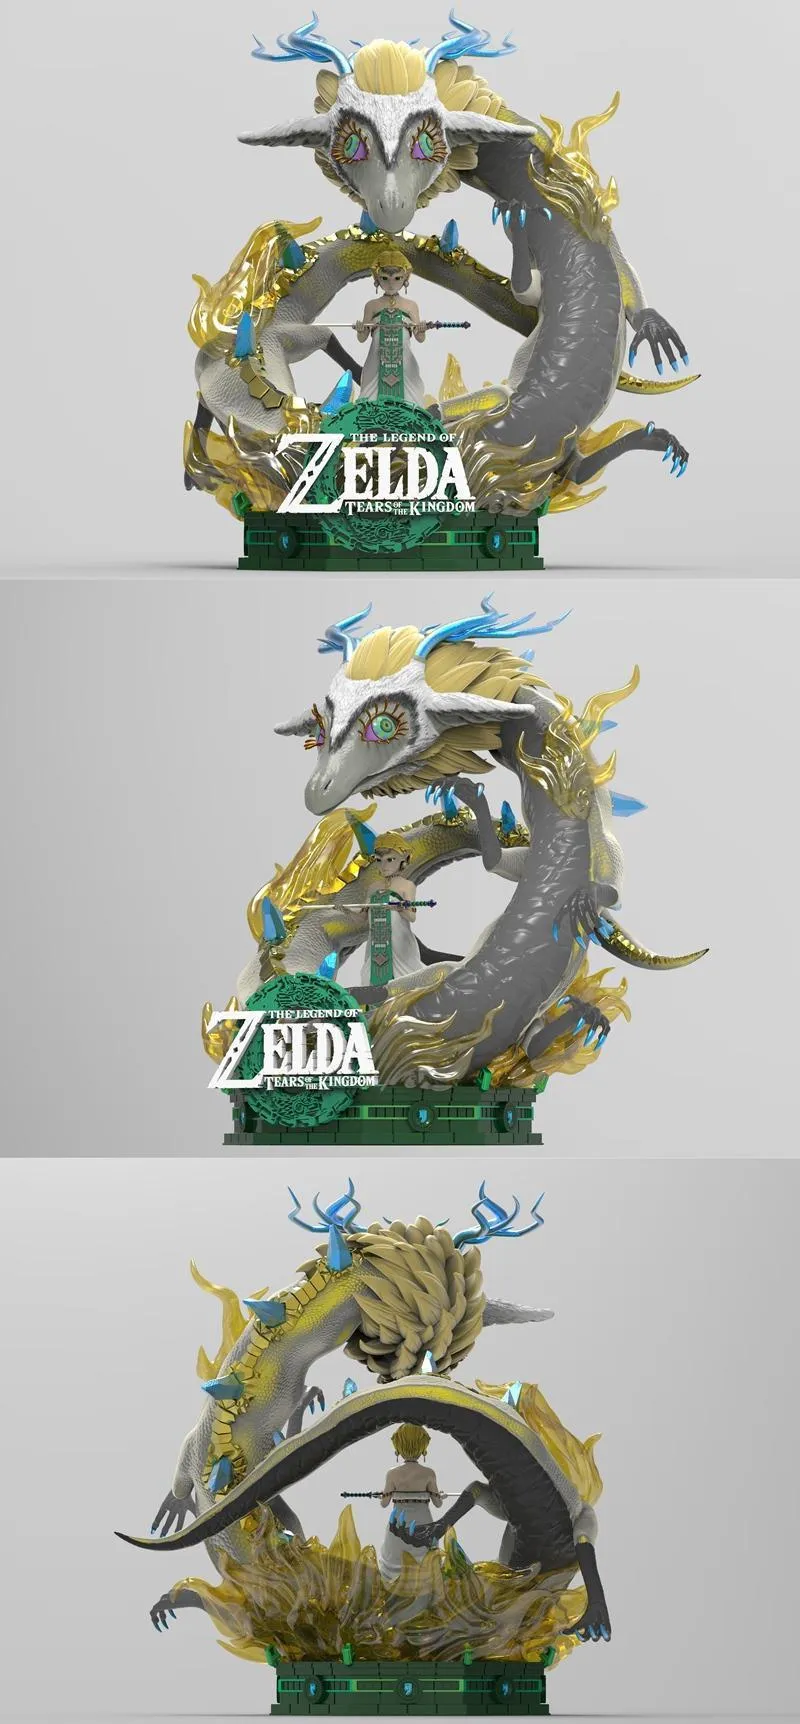 Embark on a Legendary Quest with Zelda: A Timeless 3D Model Tribute